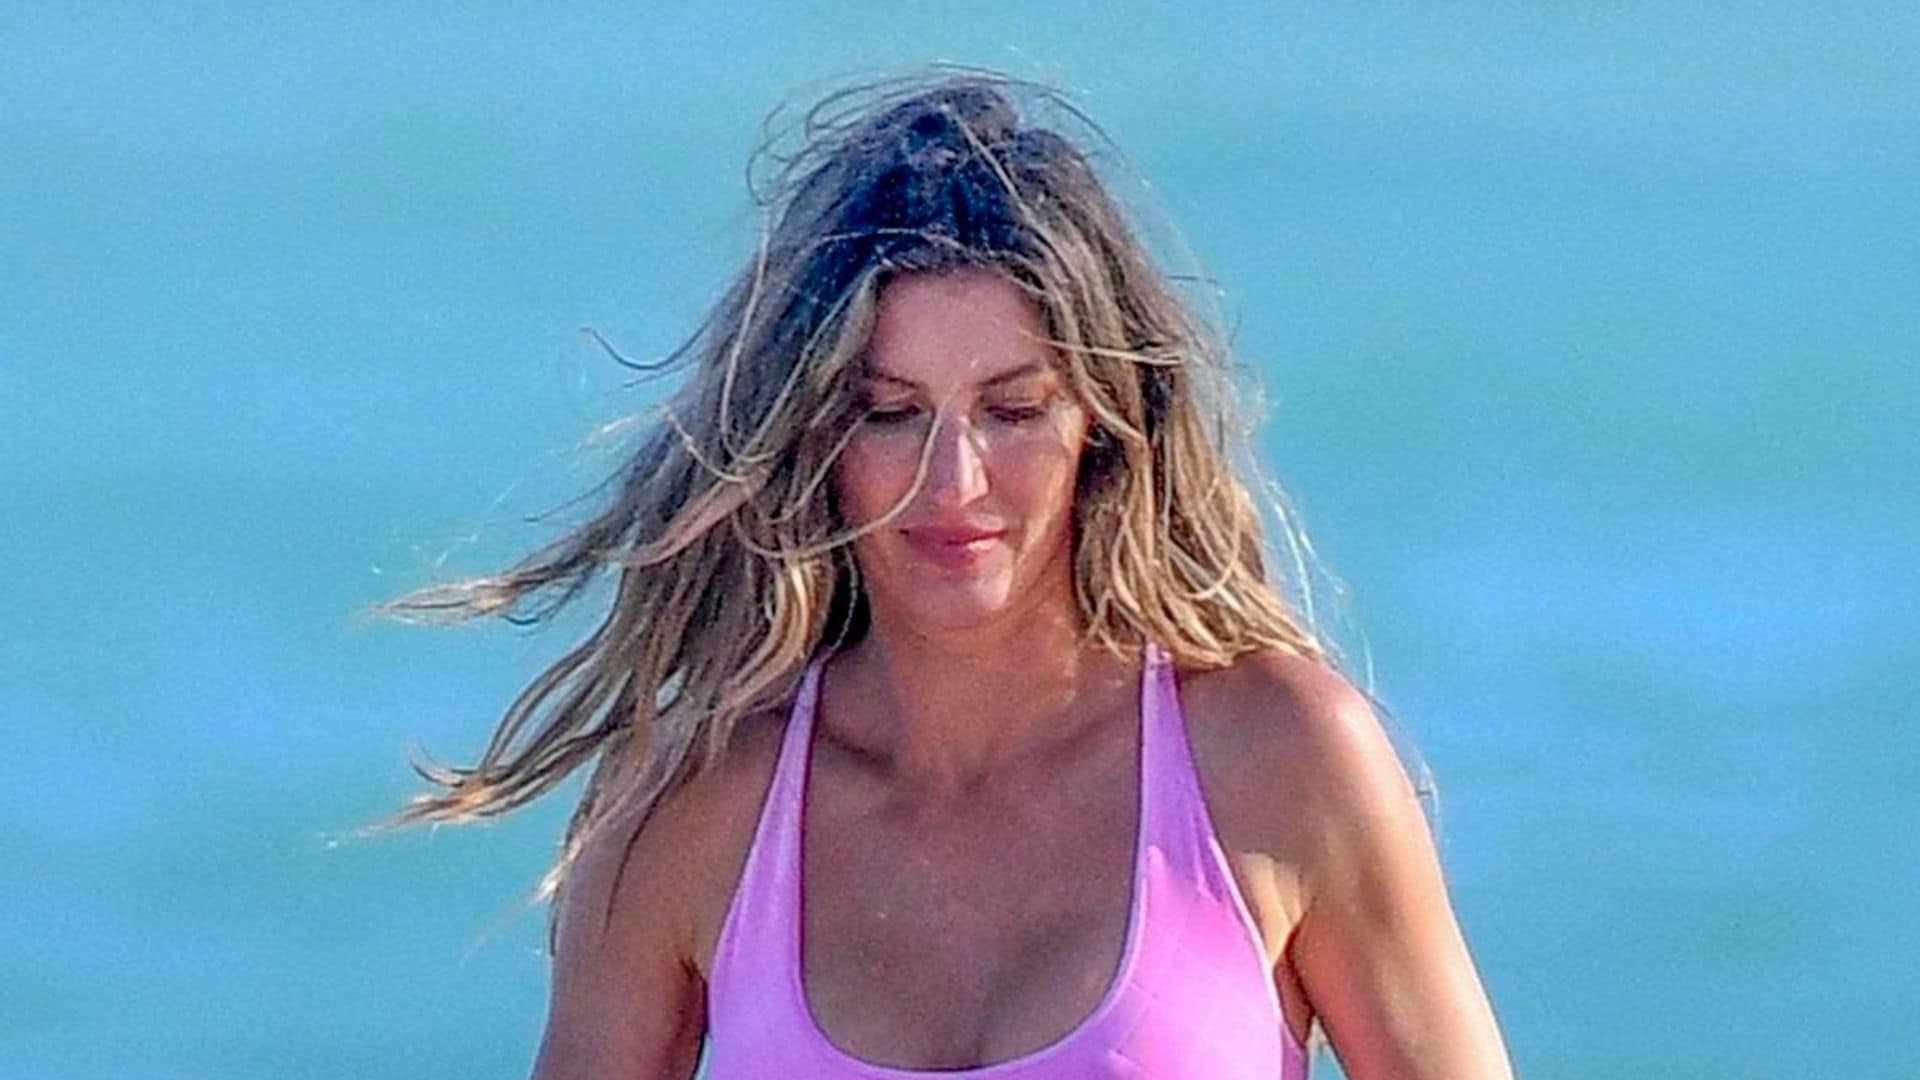 Gisele Bündchen looks stunning in a new bathing suit photoshoot